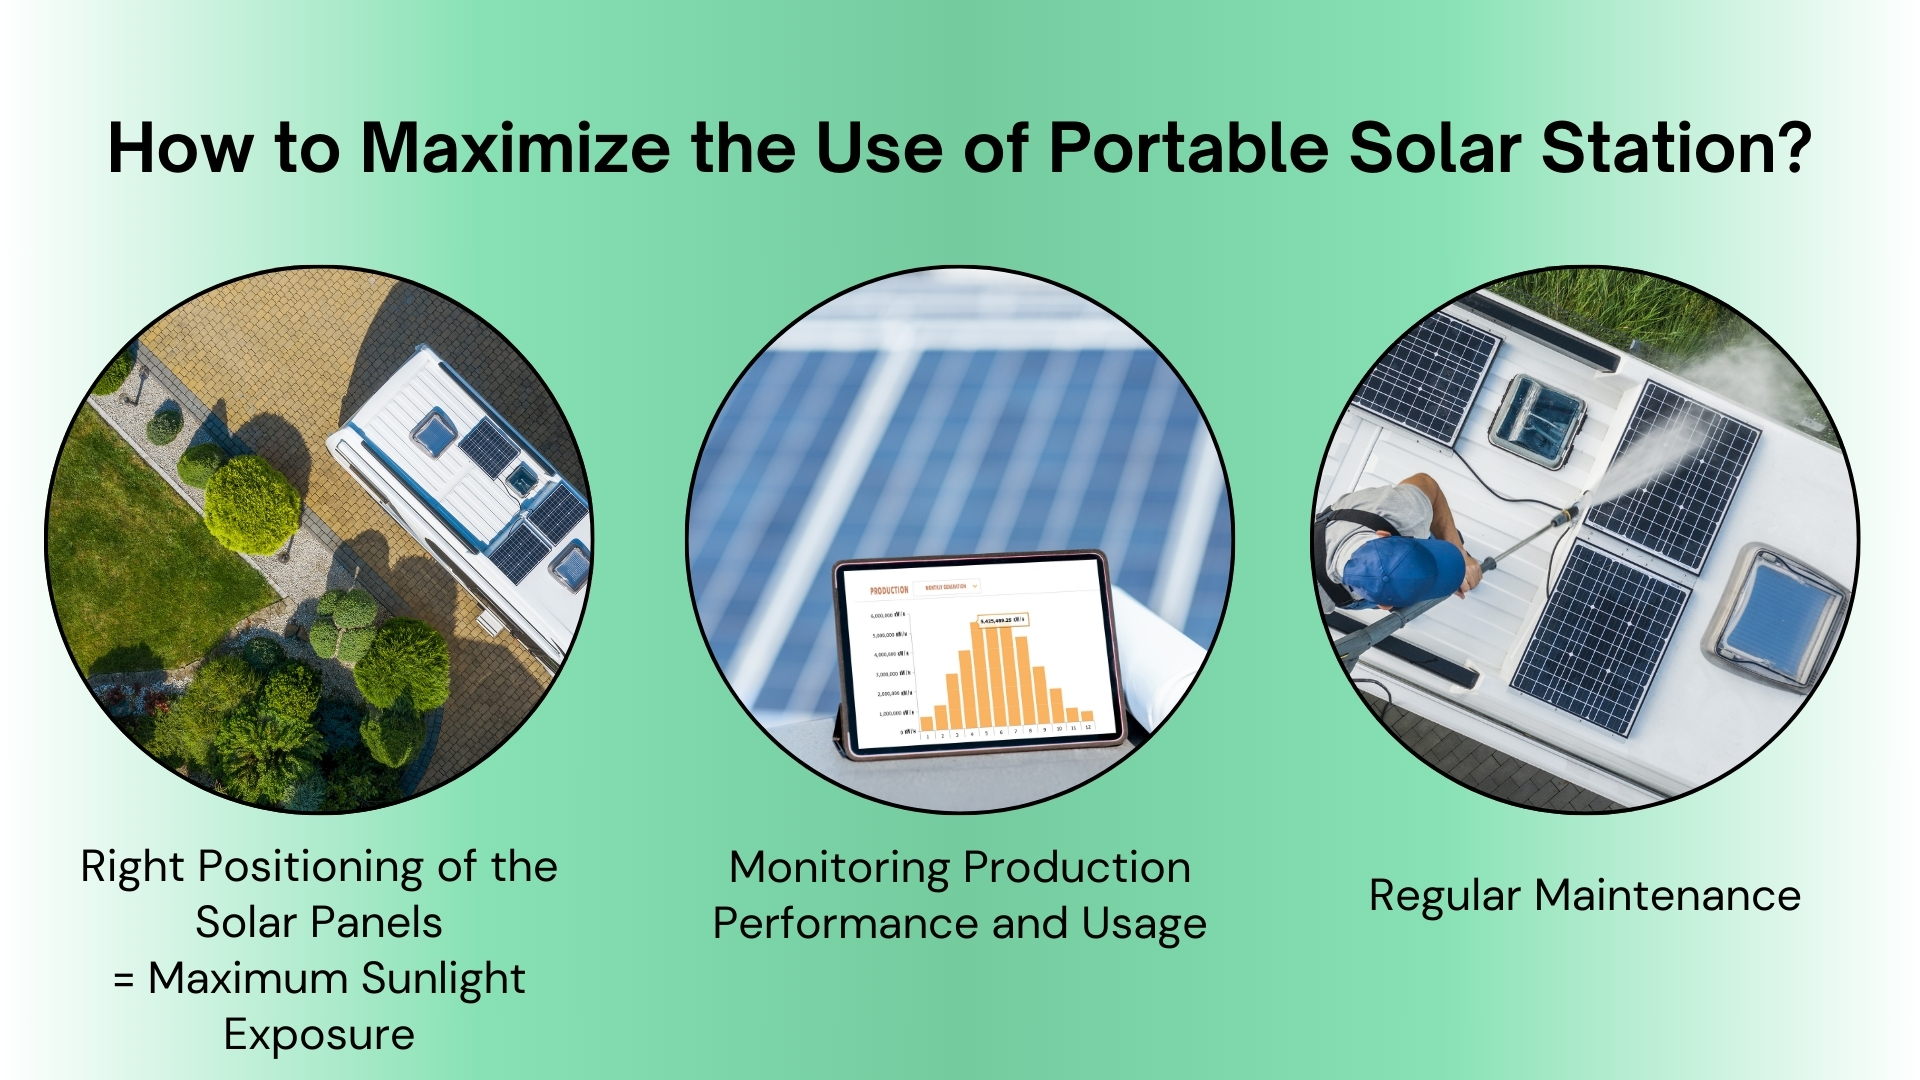 A visual guide on how to maximize the use of a portable solar station.